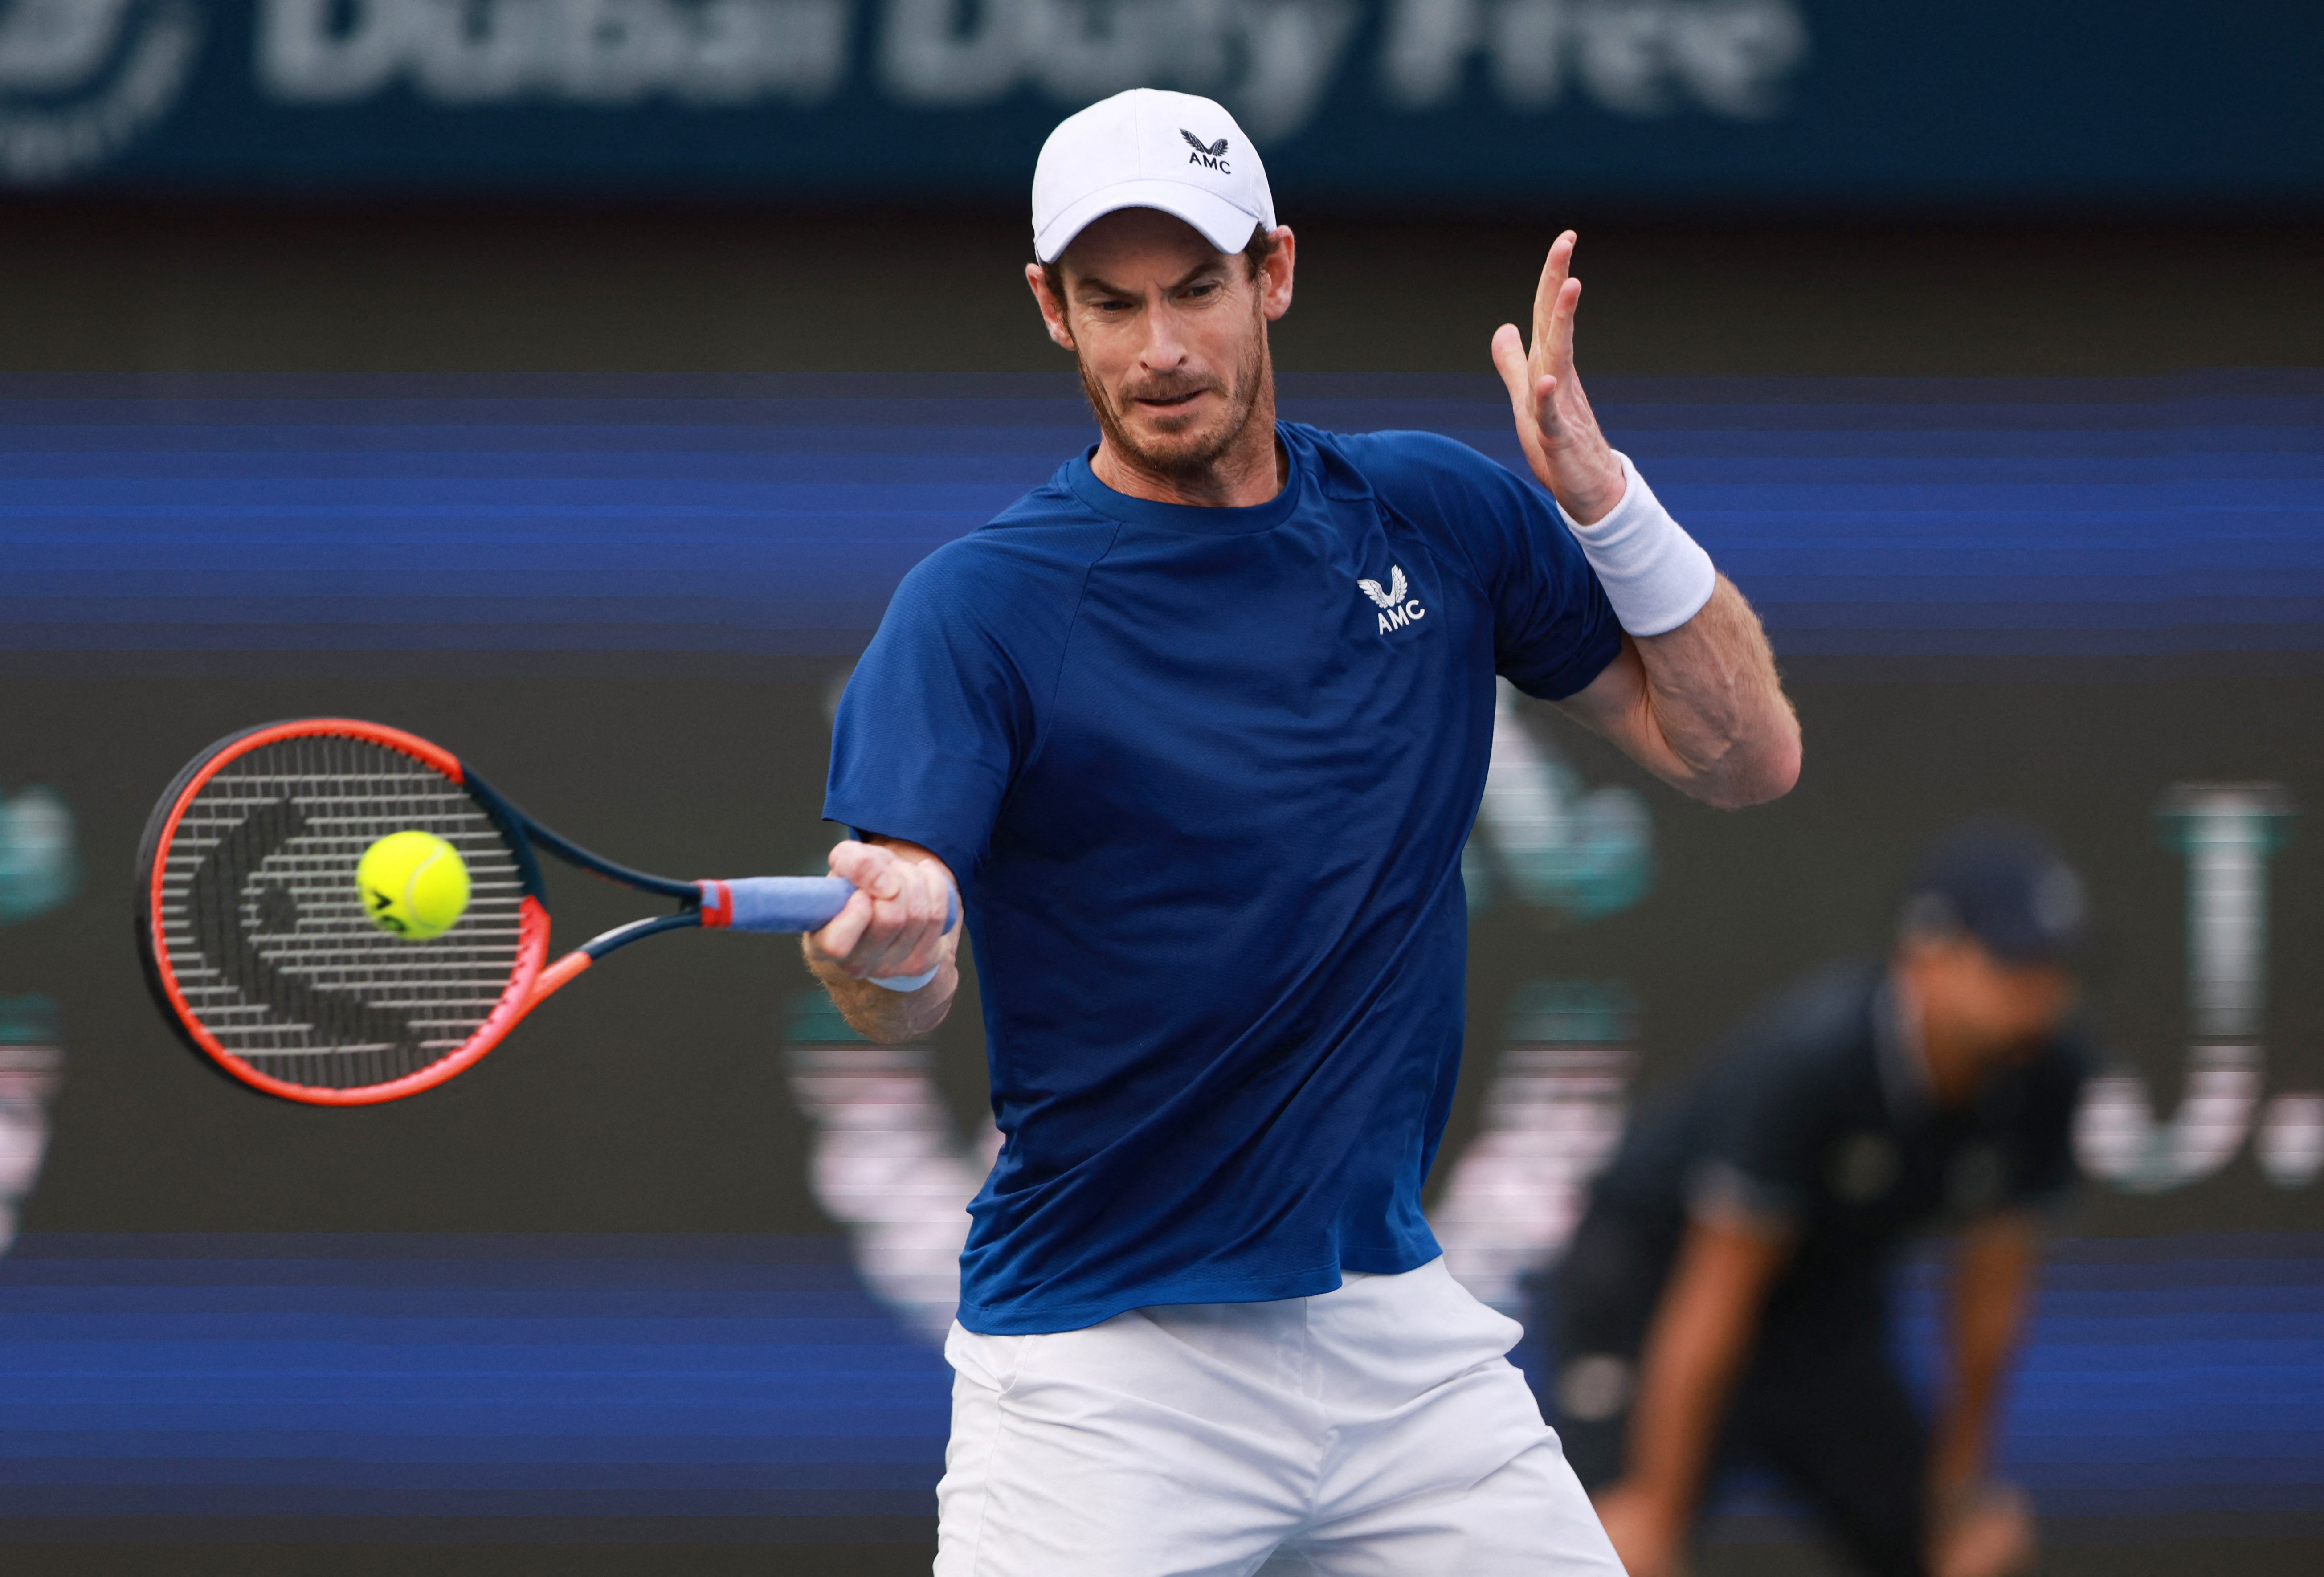 Andy Murray will take on David Goffin at Indian Wells